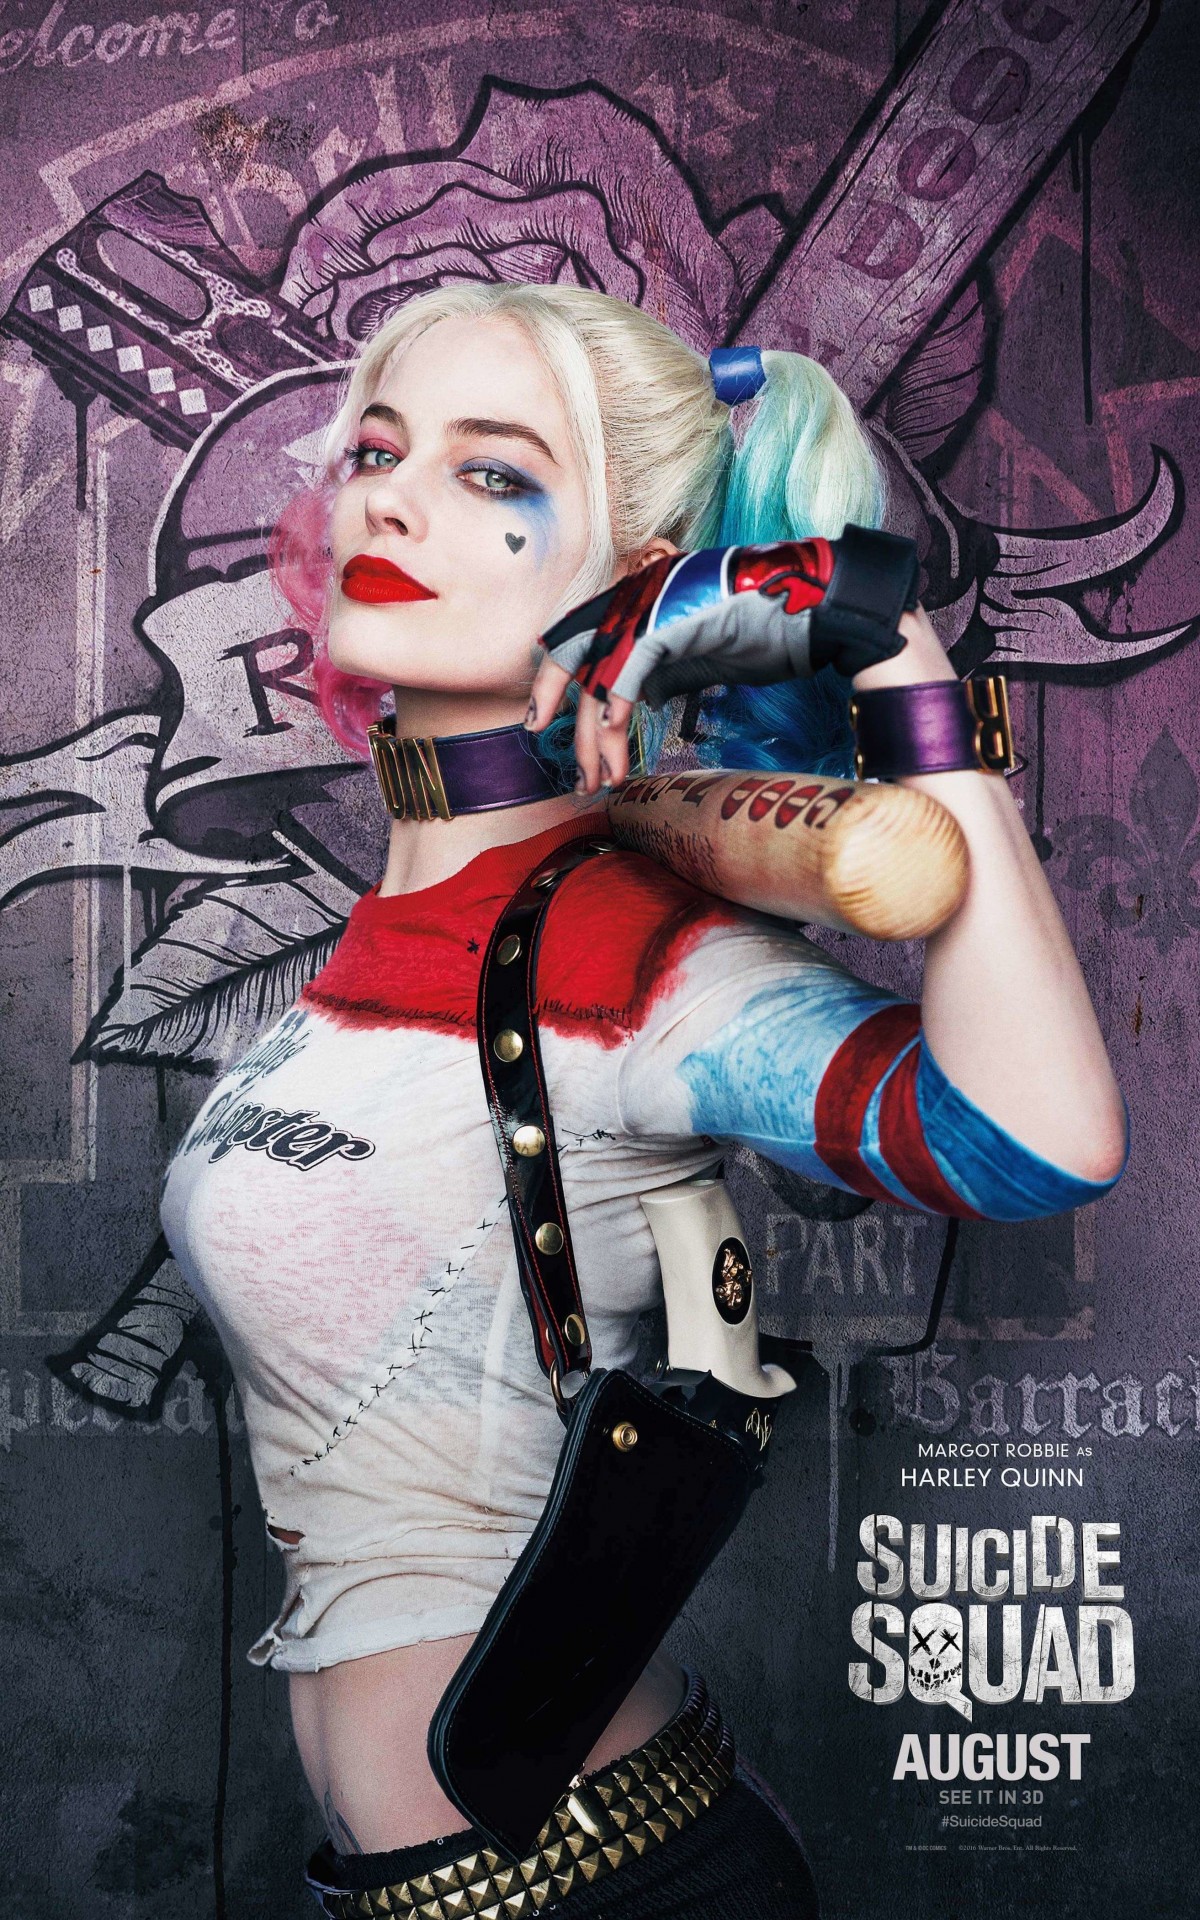 Harley Quinn - Suicide Squad Wallpaper for Amazon Kindle Fire HDX